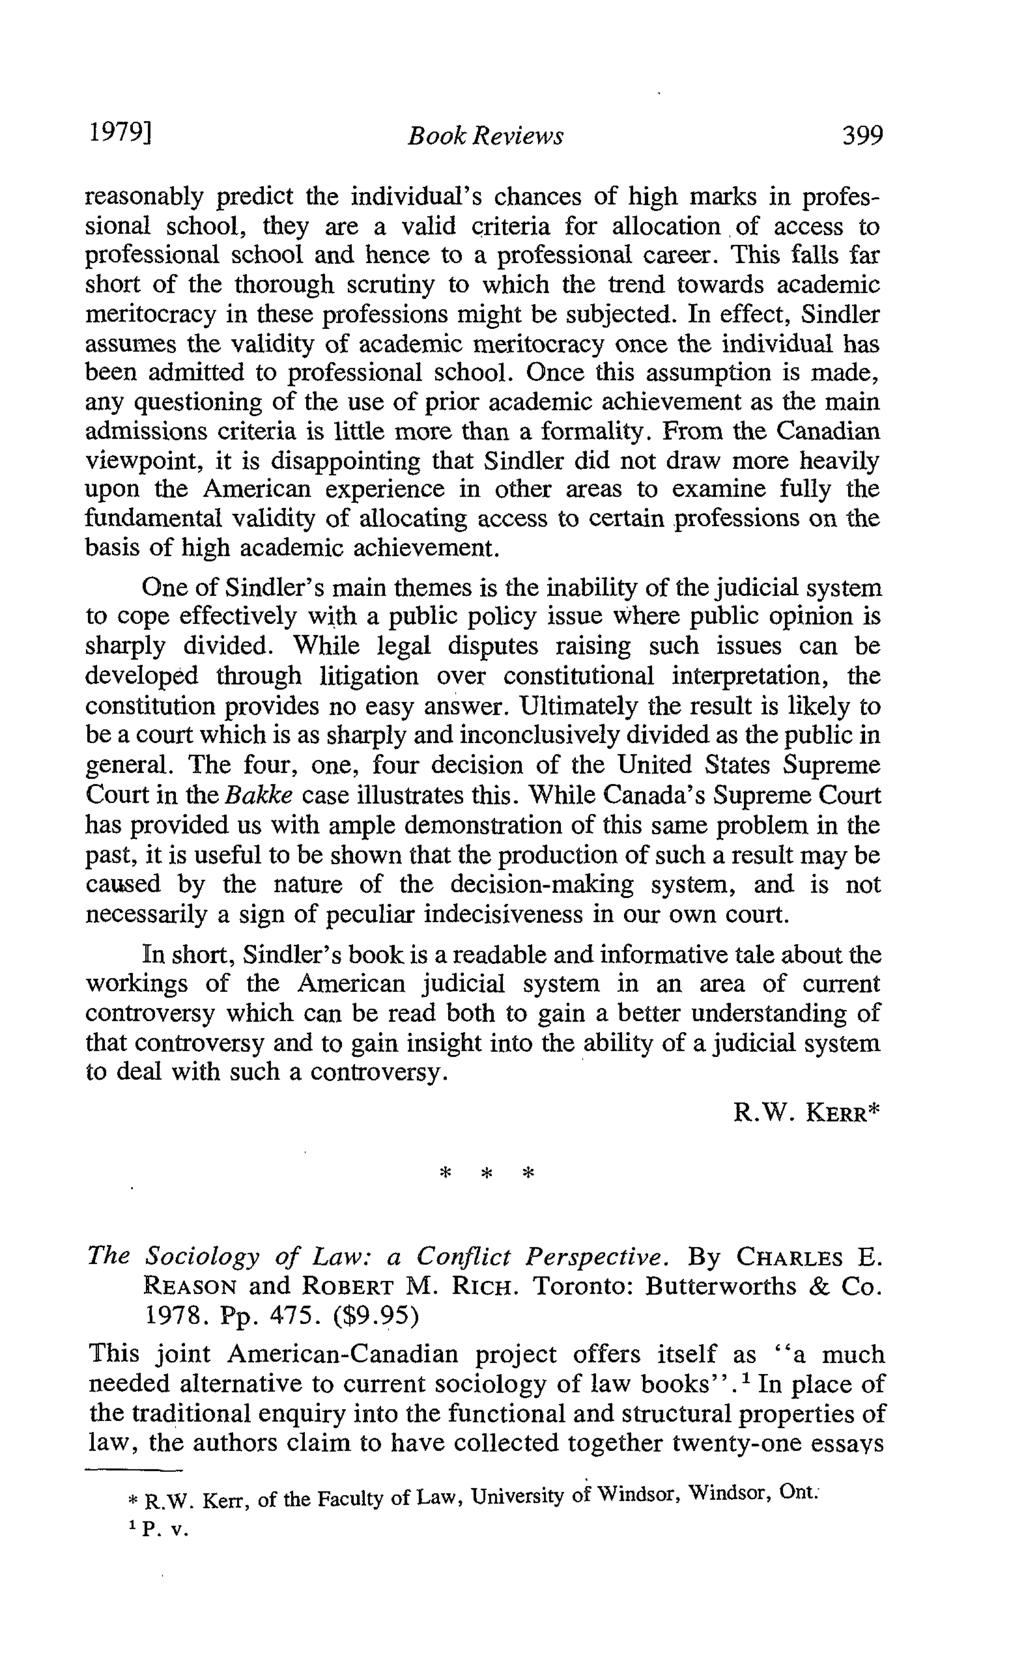 The Sociology of Law : a Conflict Perspective. By CHARLES E. REASON and ROBERT 1VI. Ricx. Toronto : Butterworths & Co. 1978. Pp. 475. ($9.